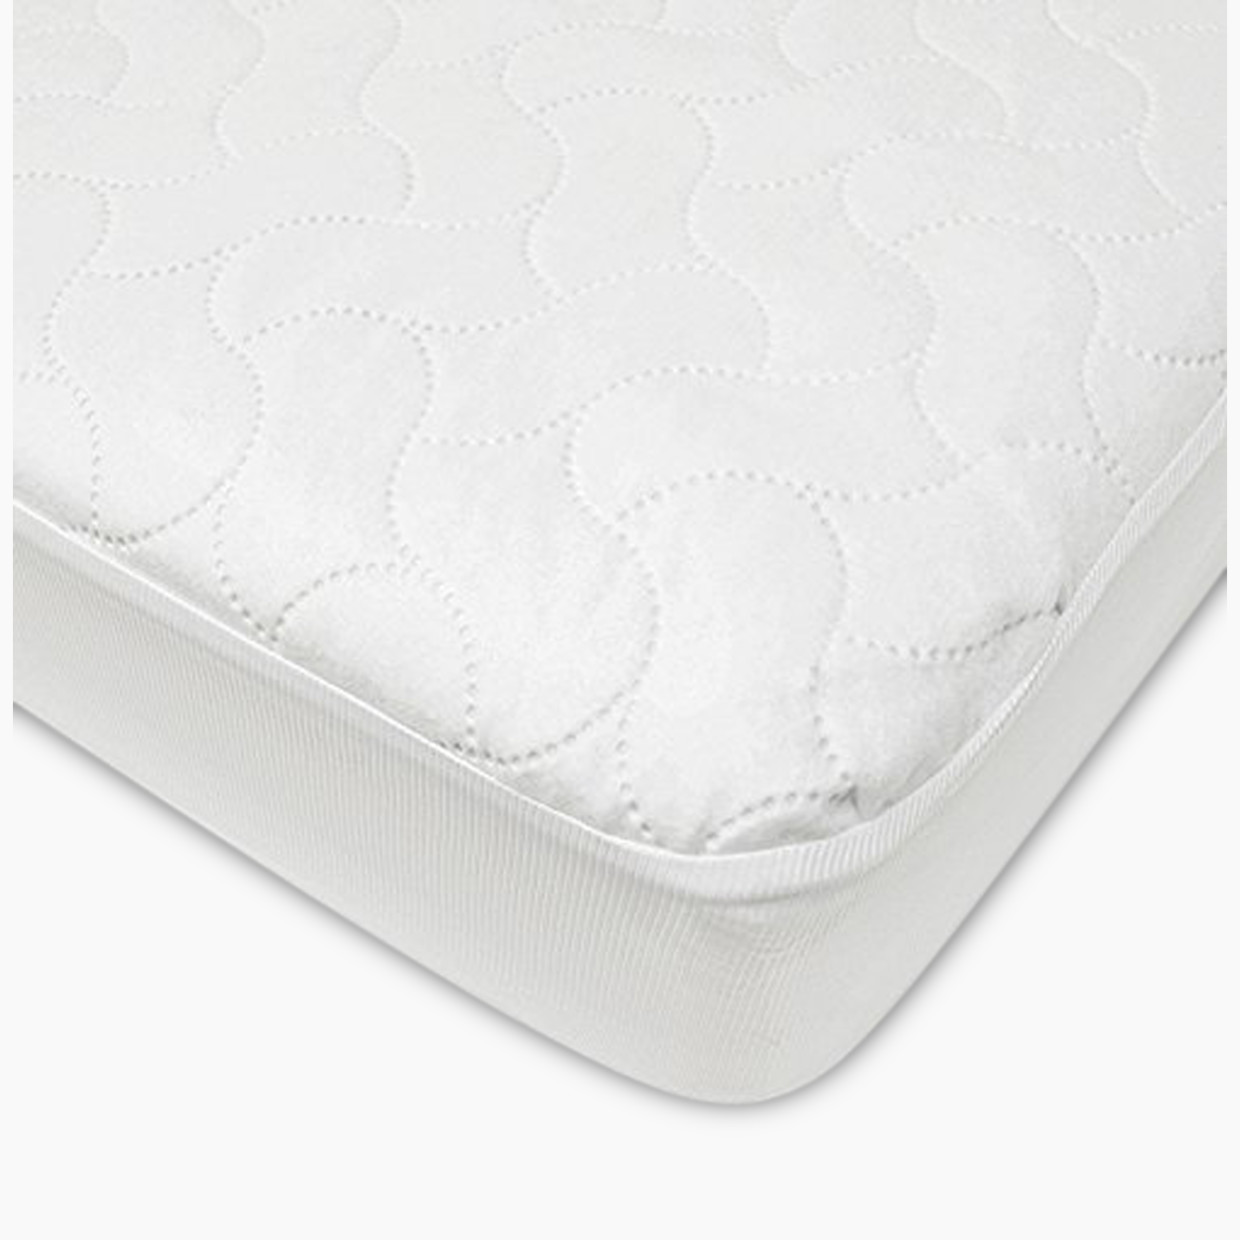 American Baby Company Waterproof Fitted Quilted Crib and Toddler Protective Pad Cover, White, 28 x 52 - 2 count